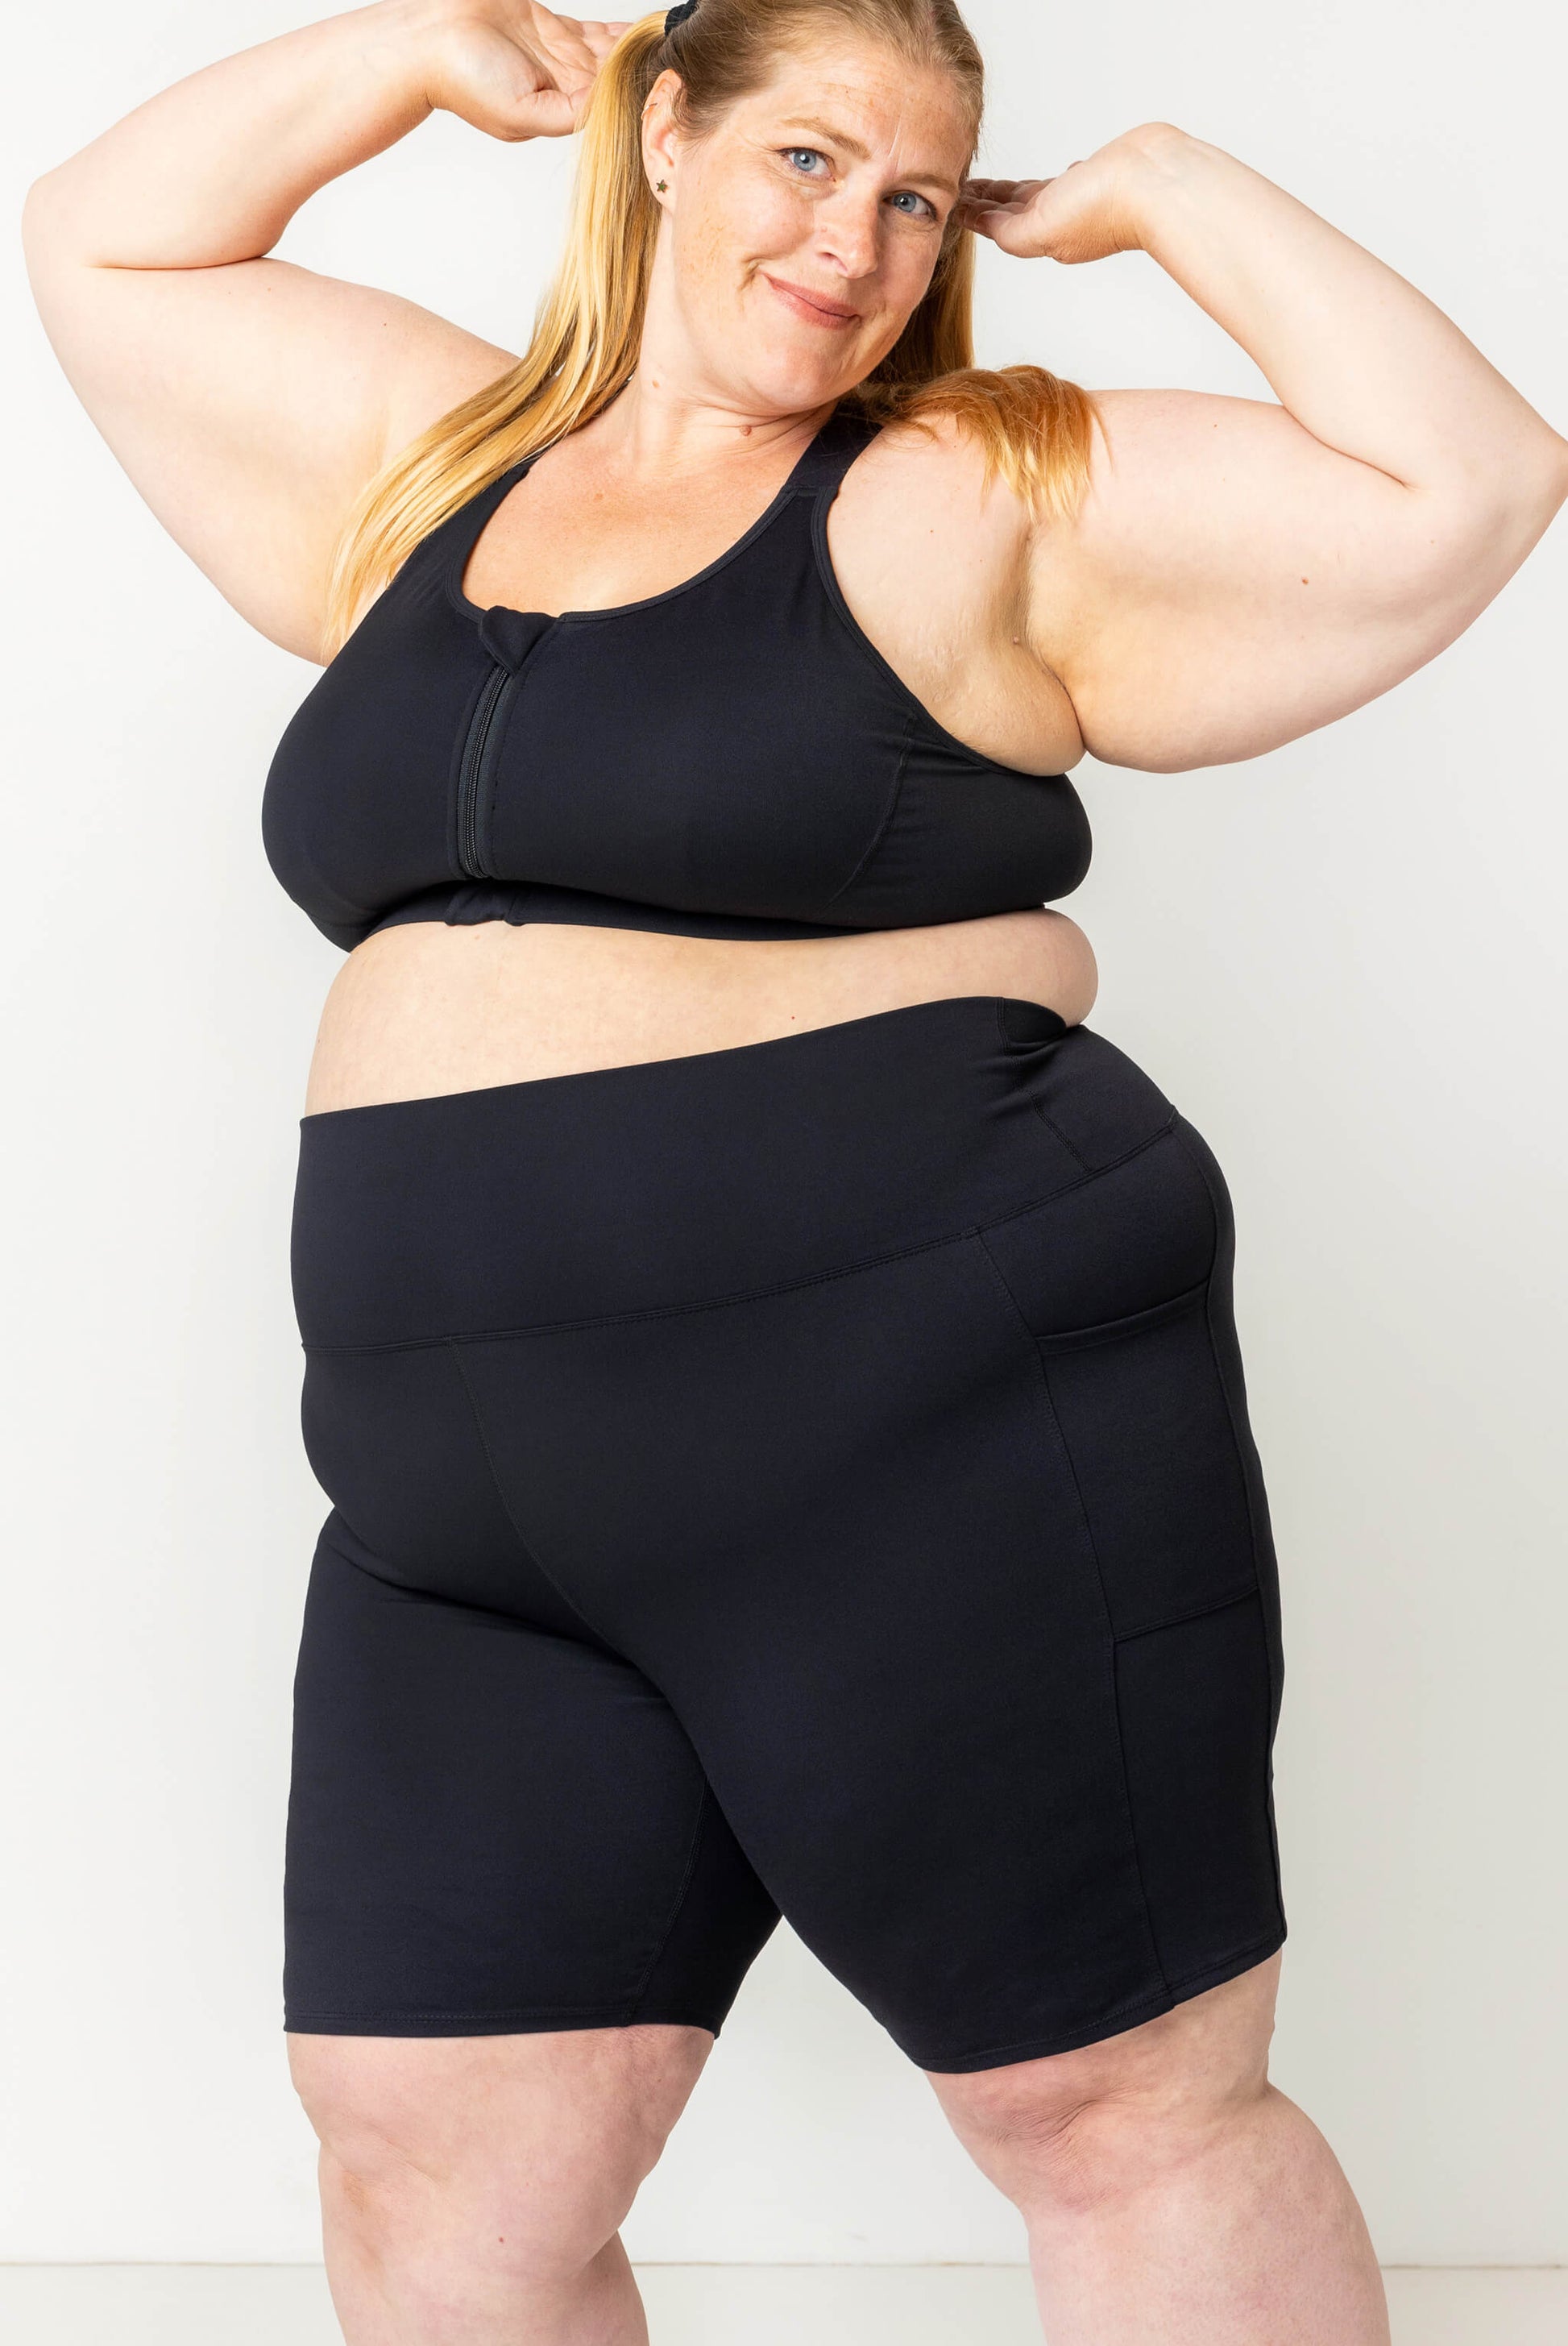 plus size model with arms up, modeling size 4X pocket bike shorts in compression fabric